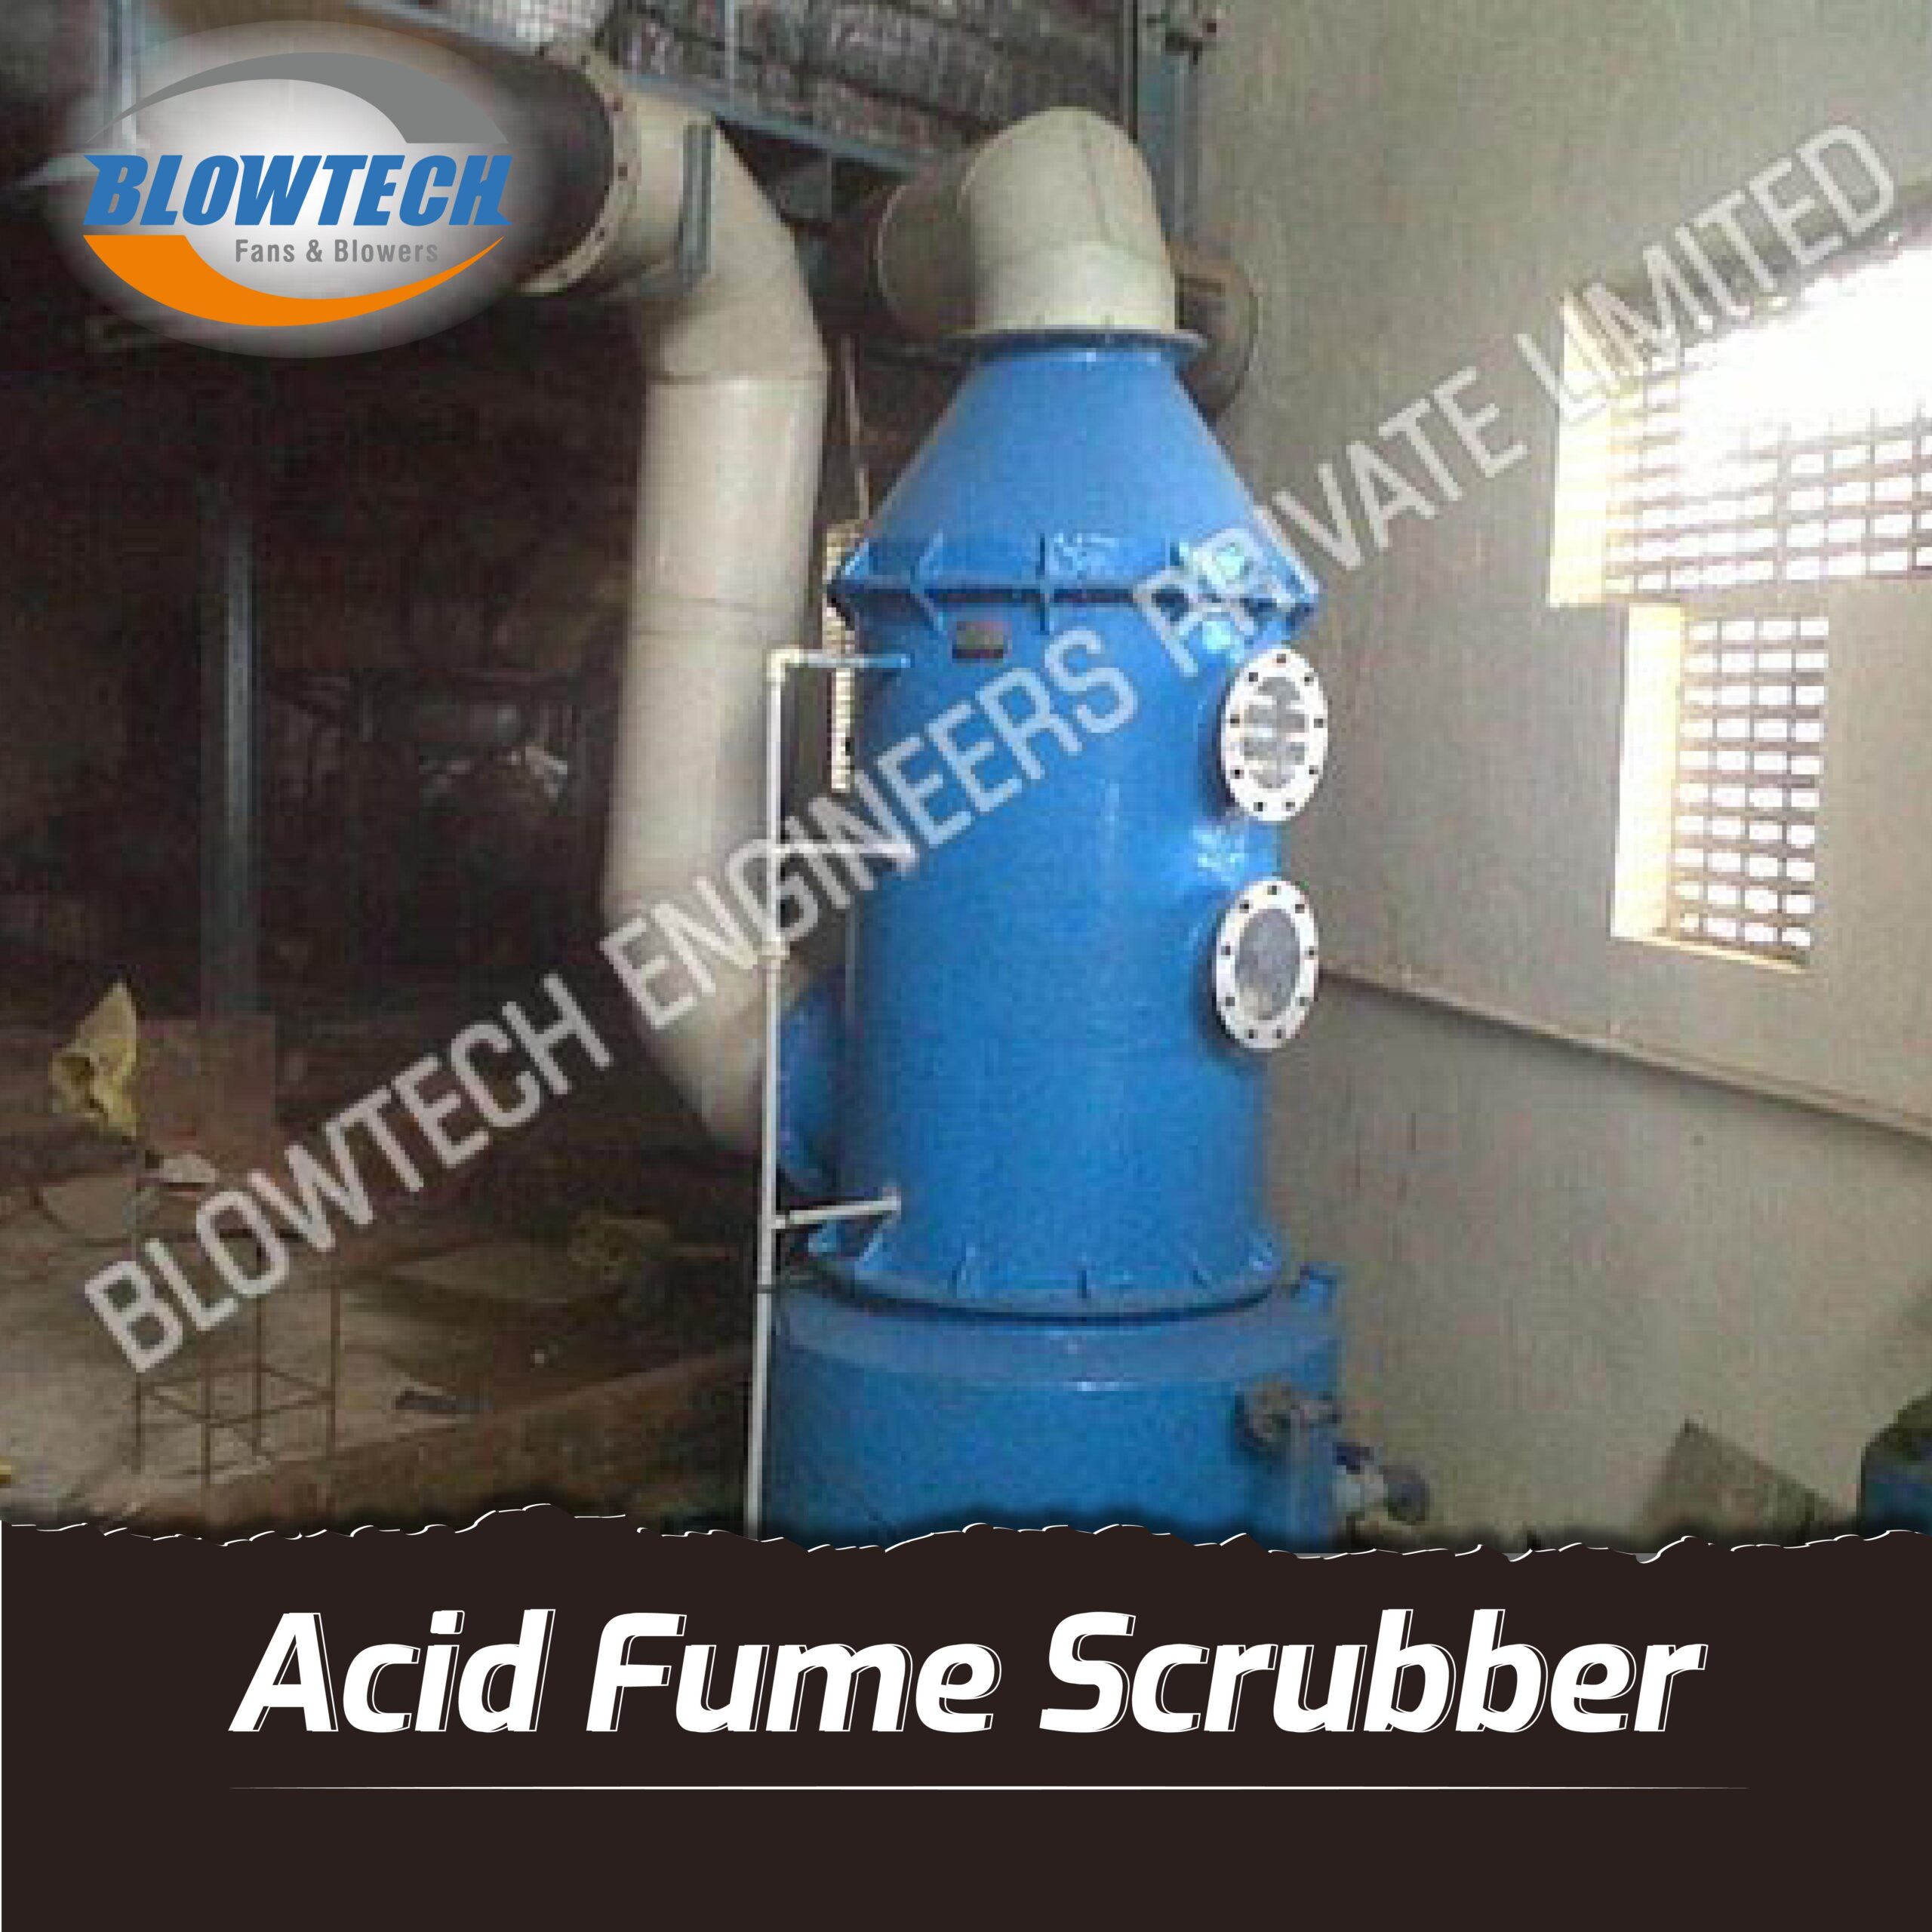 Acid Fume Scrubber  manufacturer, supplier and exporter in Mumbai, India